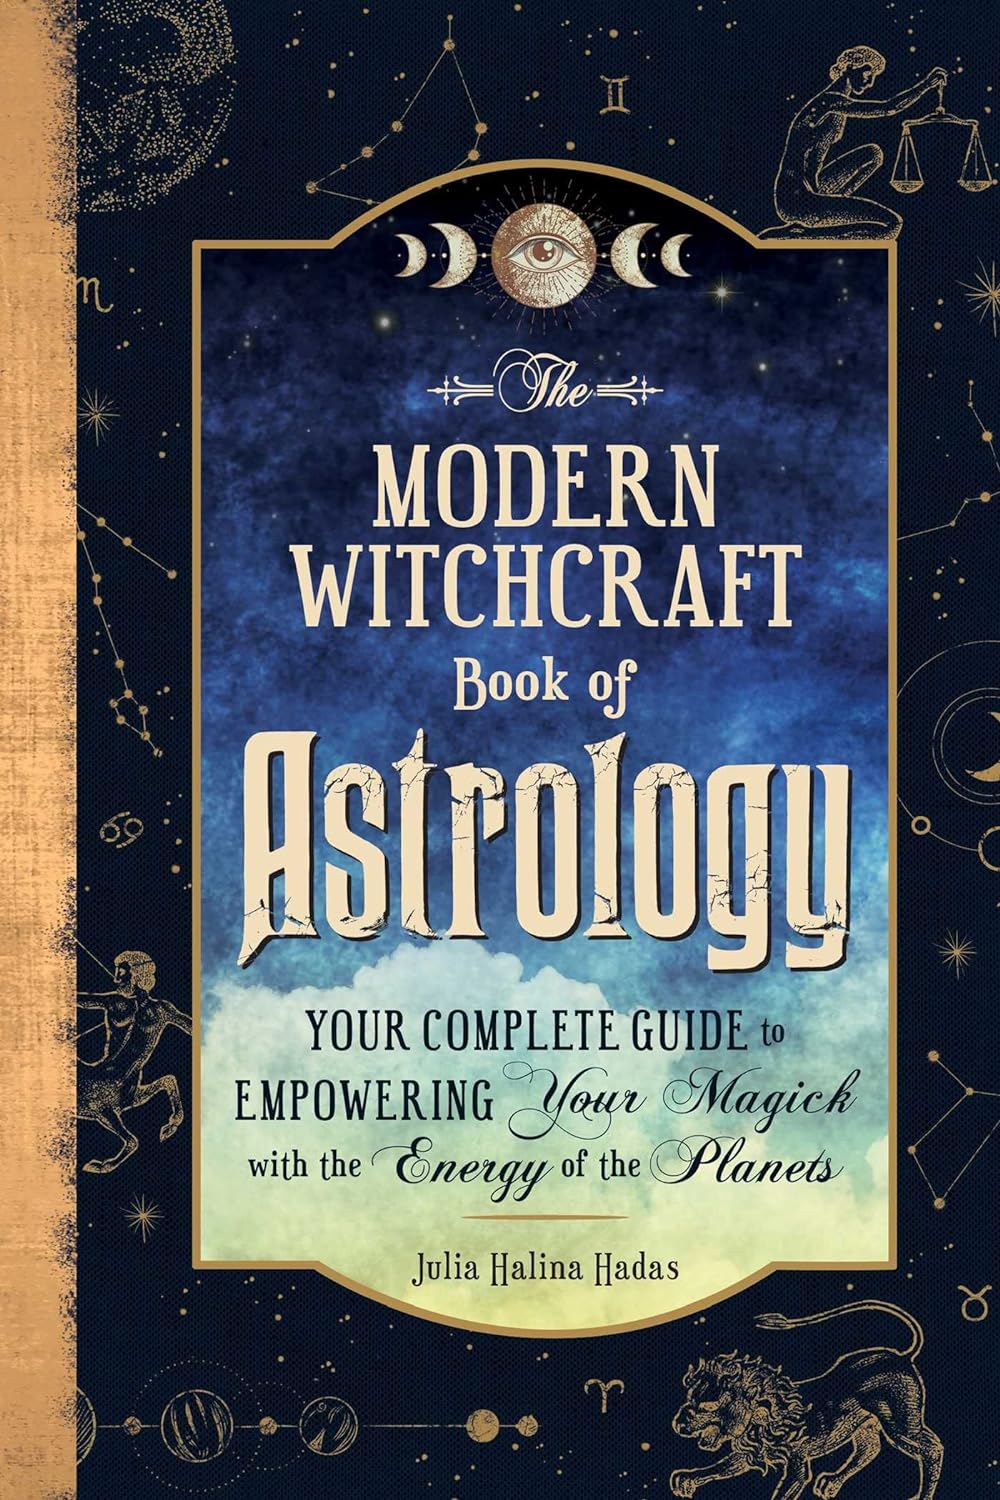 The Modern Witchcraft Book Of Astrology: Your Complete Guide To Empowering Your Magick With The Energy Of The Planets